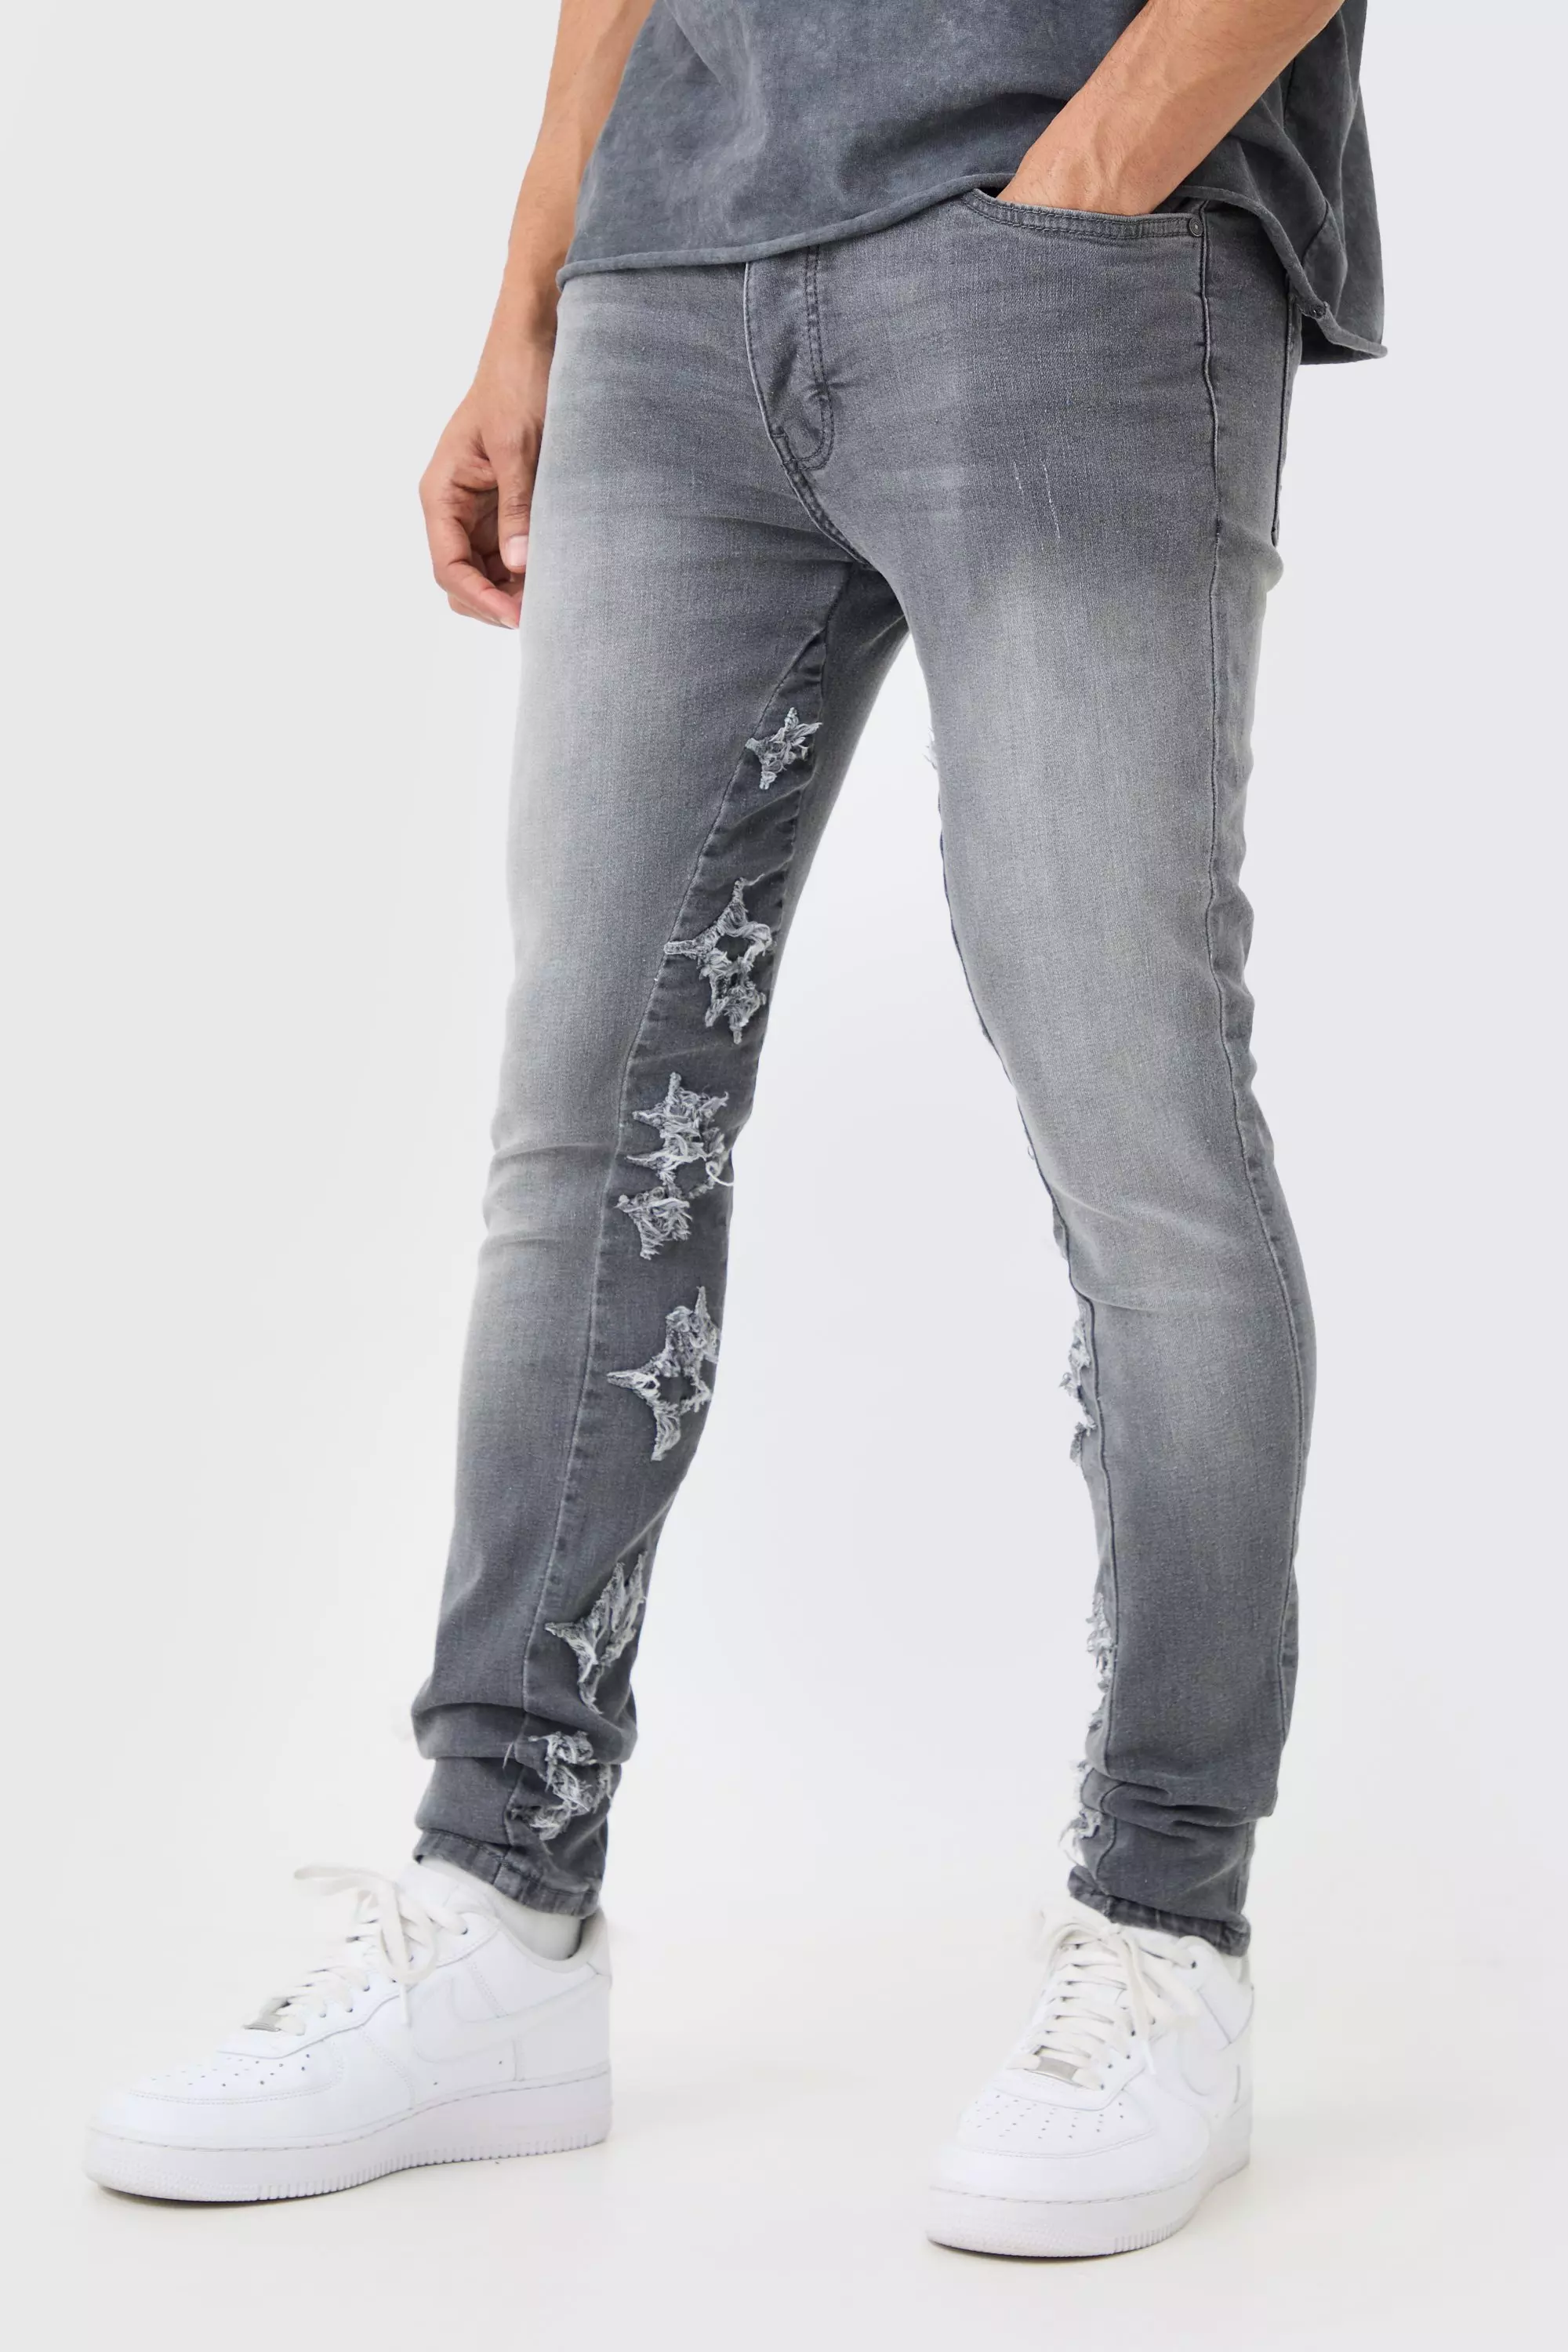 Skinny Stretch Overdyed Applique Gusset Jeans In Grey Grey